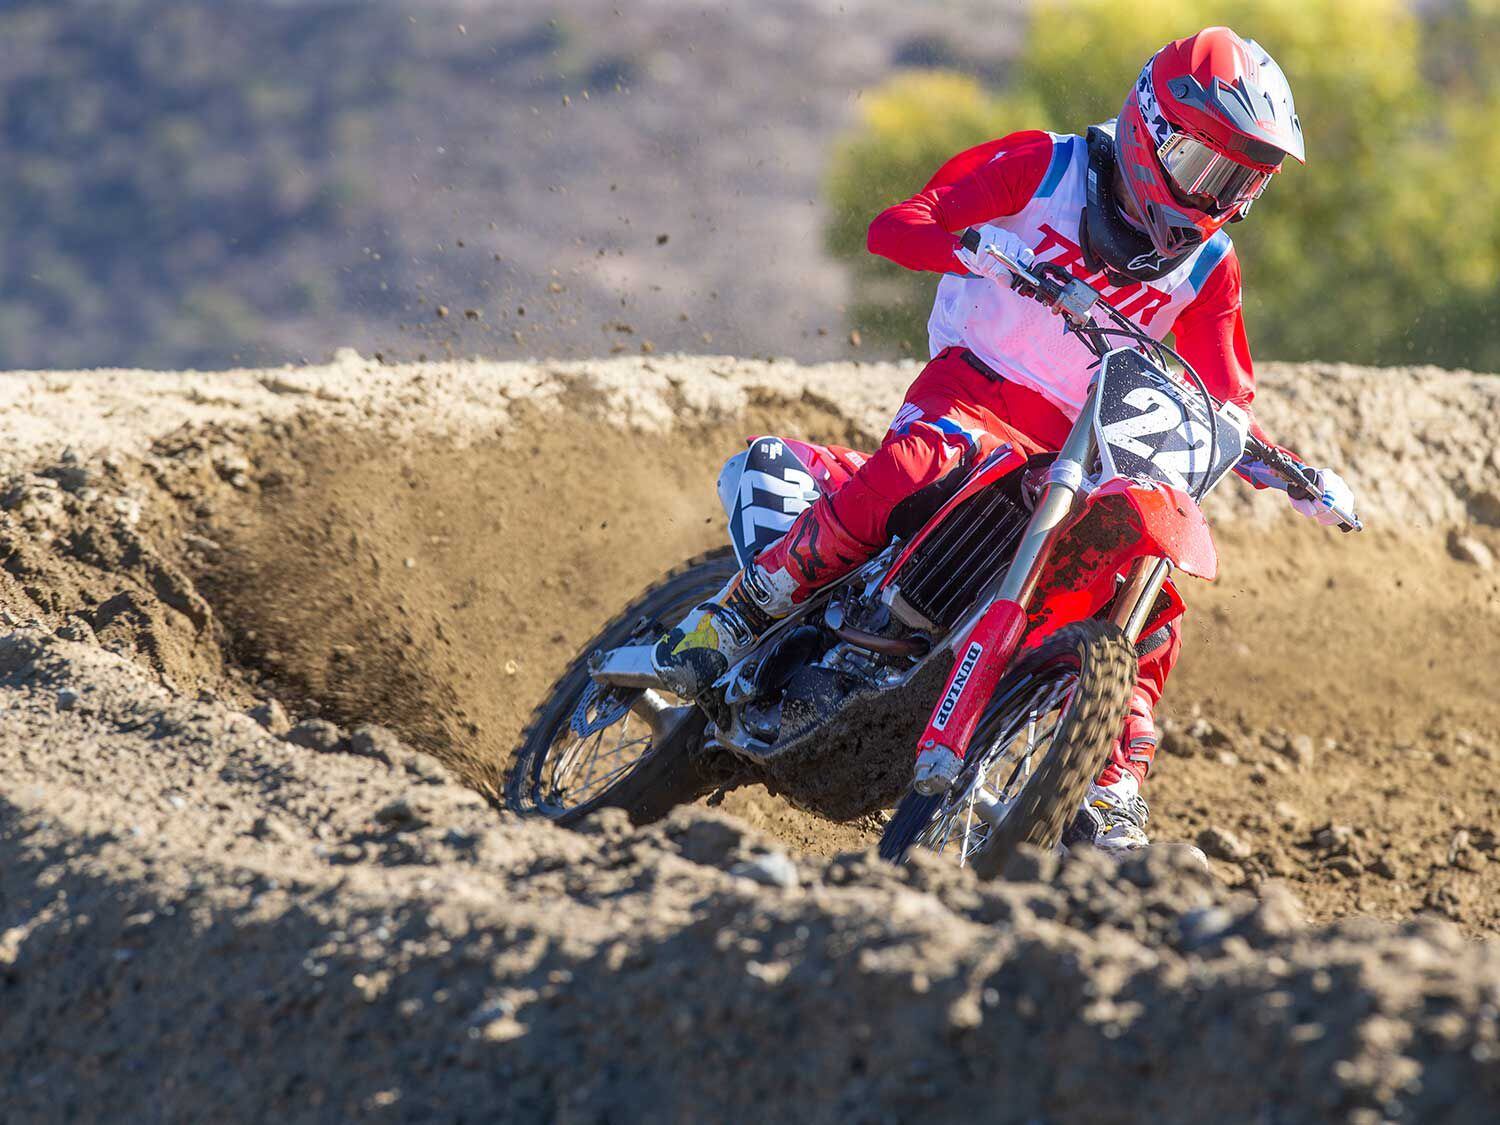 “I really enjoyed my time on the Honda CRF250R. In comparison to the last time I rode it, which was a 2019 model, it feels much more stable and confidence inspiring to charge hard, while also offering an incredibly smooth powerplant that is so good on so many levels. Seriously, it’s so easy to ride (but not slow!) at every rpm. Honda has done great work here.” <em>—Michael Gilbert</em>